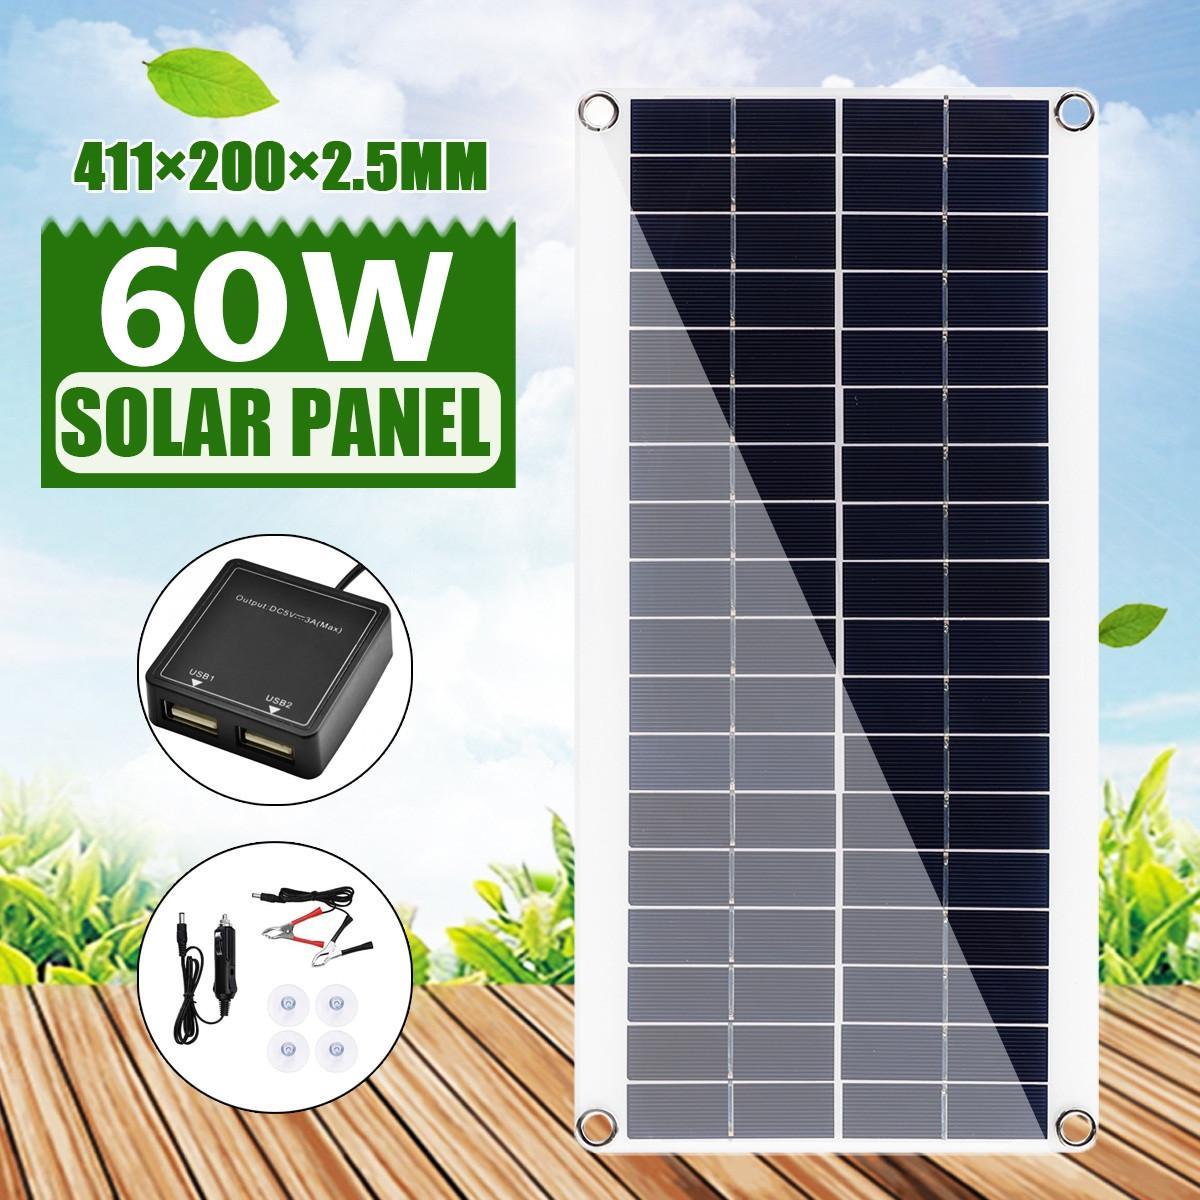 60W DC 18V Solar Panel Battery Charger Portable Solar Cell Board Crocodile Clips Car charger For Phone RV Car 411X200X2.5MM